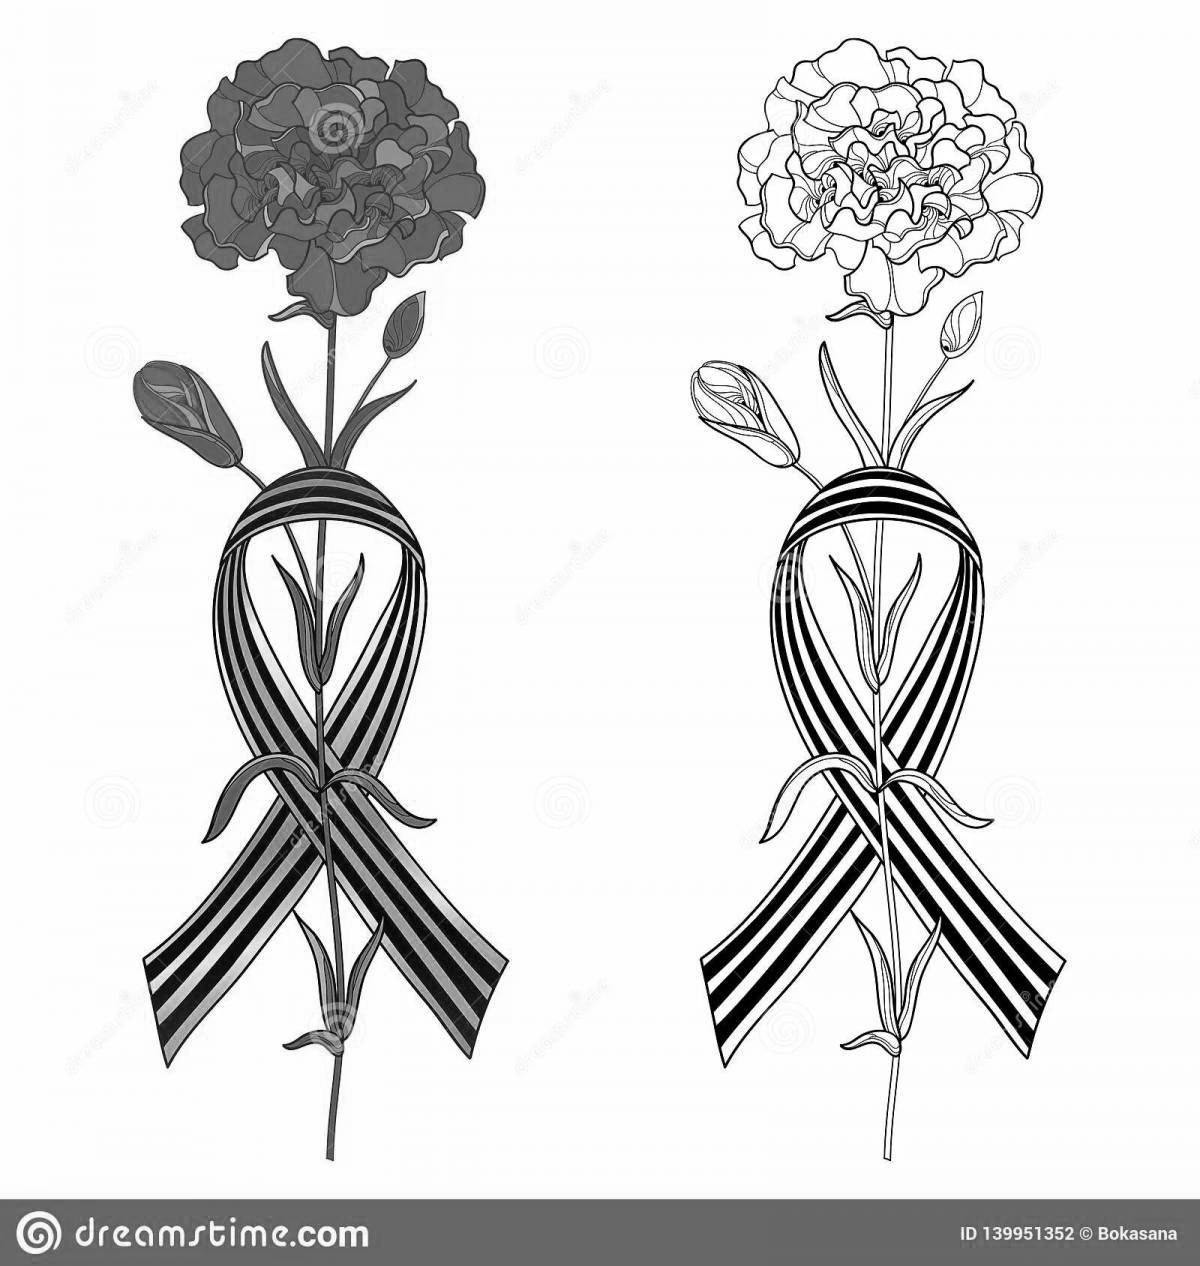 Sparkly carnation coloring pages for May 9th